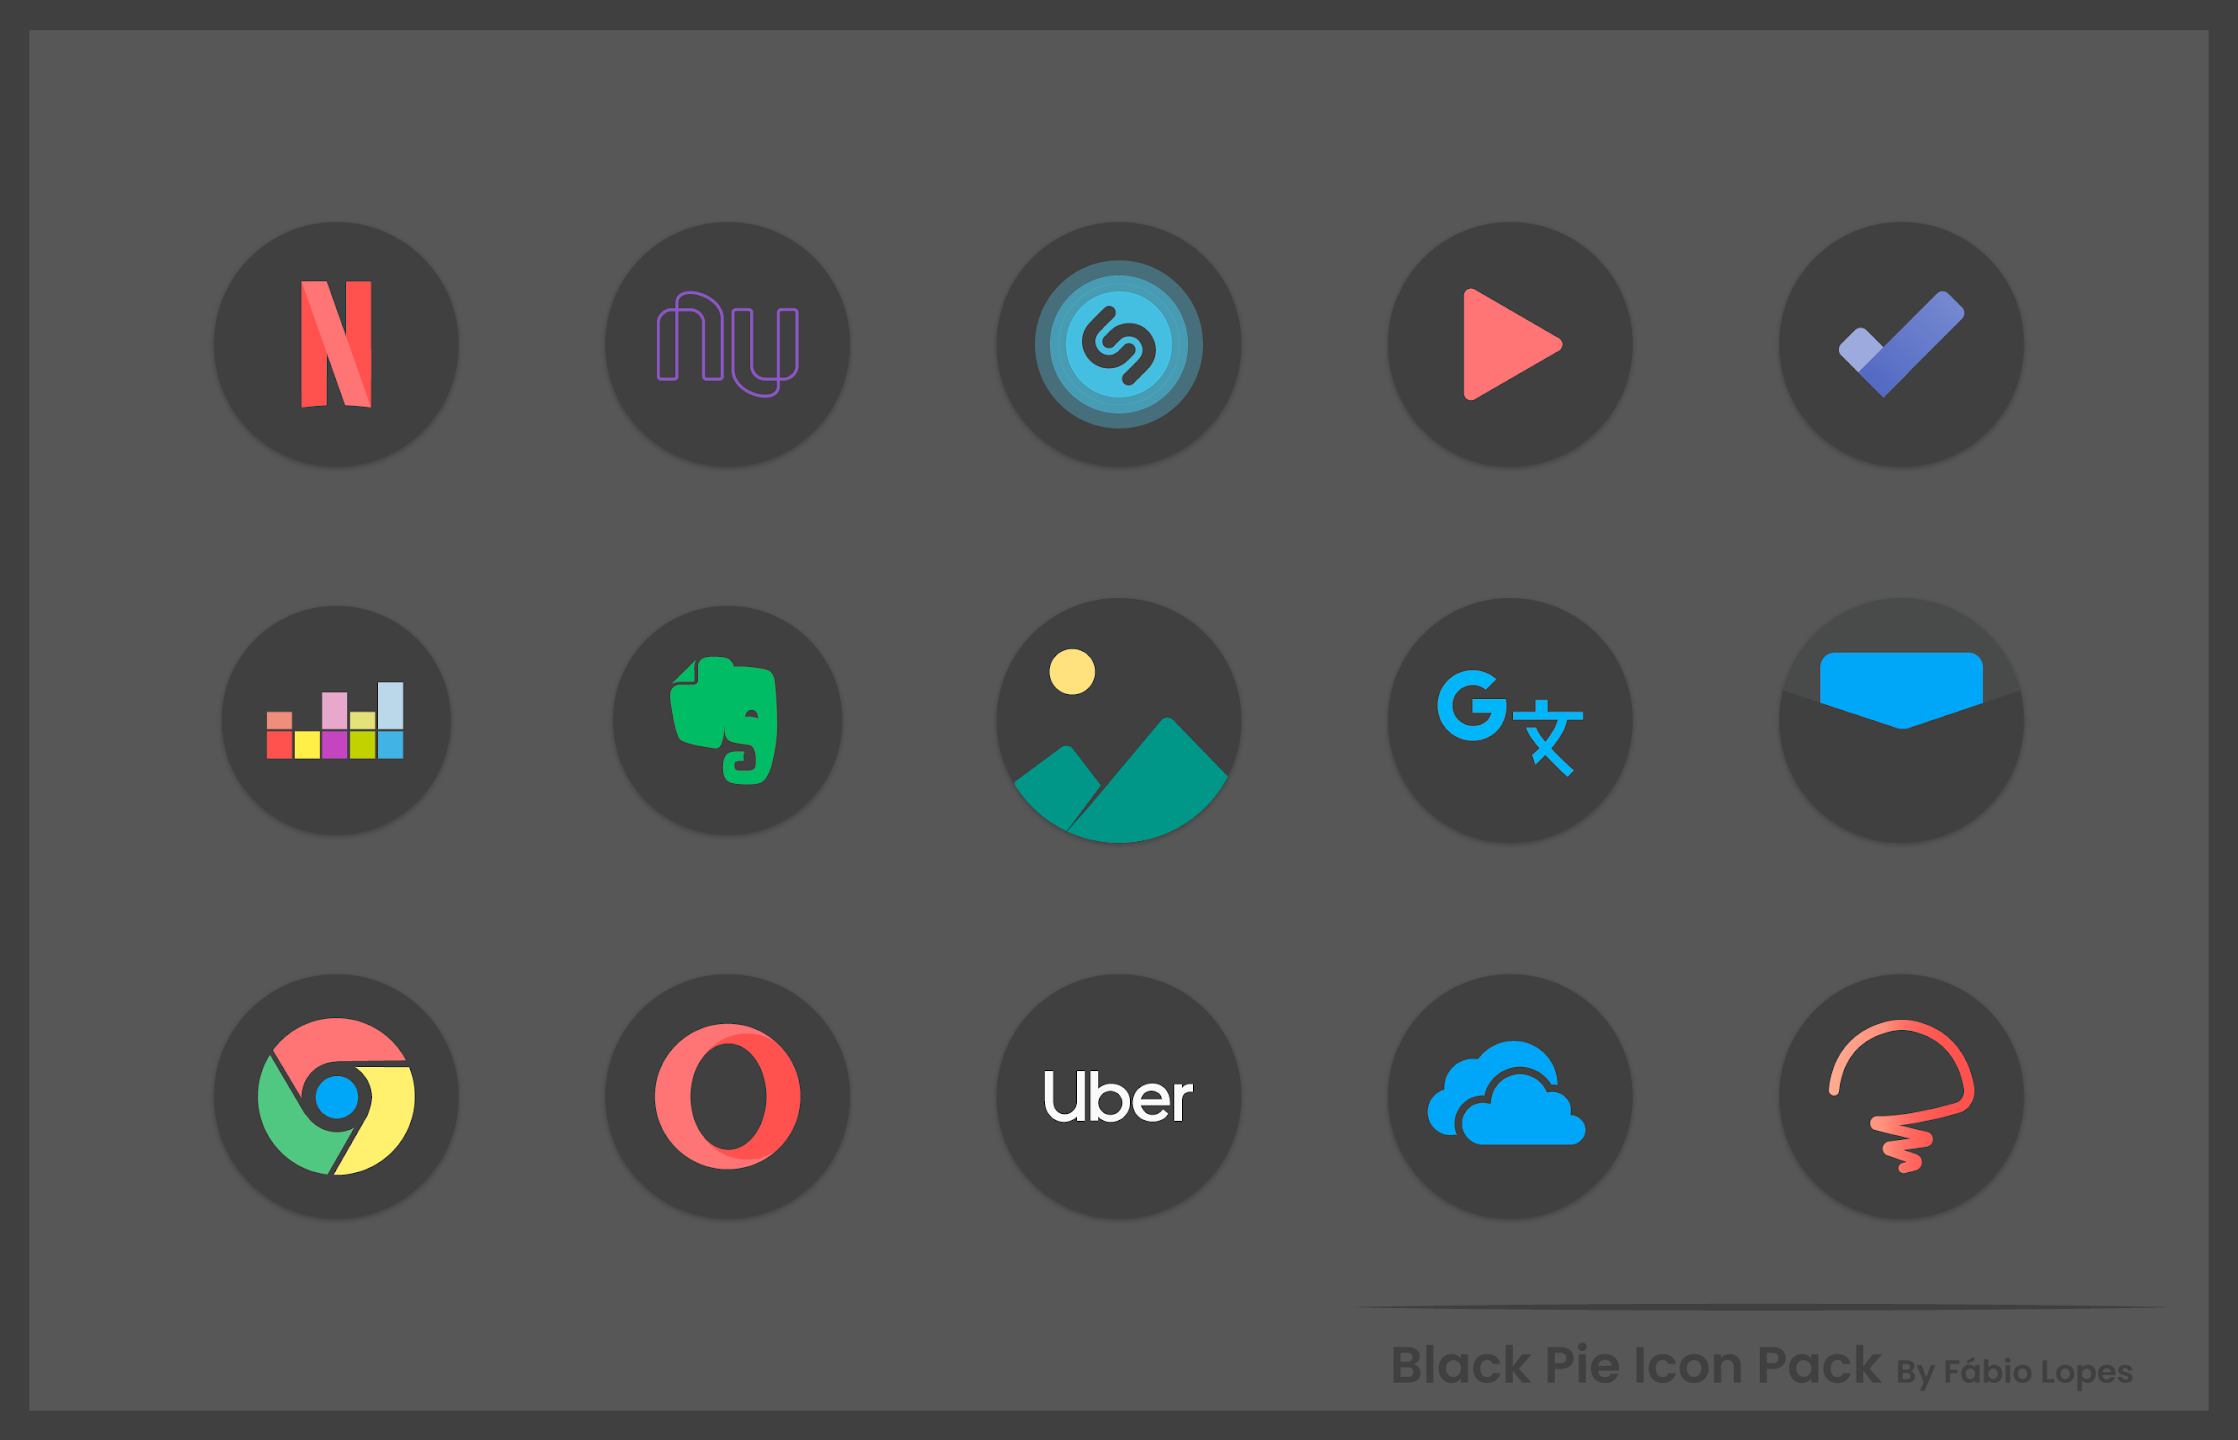 Black Pie - Icon Pack mod apk For android